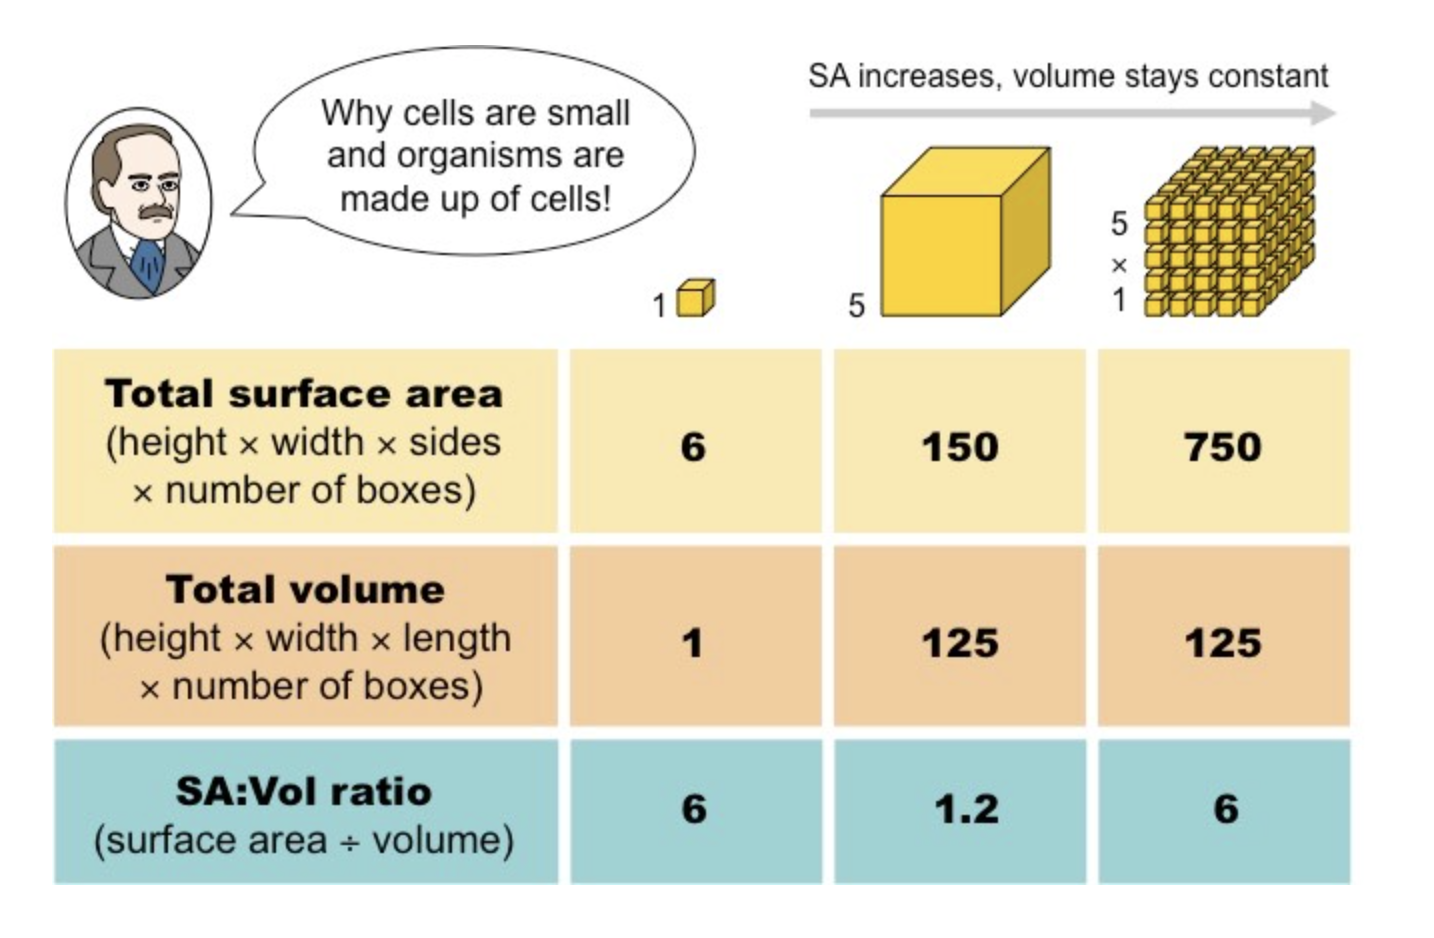 <ul><li><p>As a cell grows volume increases faster than surface area, leading to decreased SA:Vol ratio</p></li><li><p>If metabolic rate &gt; rate of vital material exchange cell dies</p></li><li><p>Hence growing cells tend to divide and remain small to maintain high SA:Vol ratio</p><ul><li><p>This way Volume stays constant with growth and SA can increase</p></li></ul></li></ul>